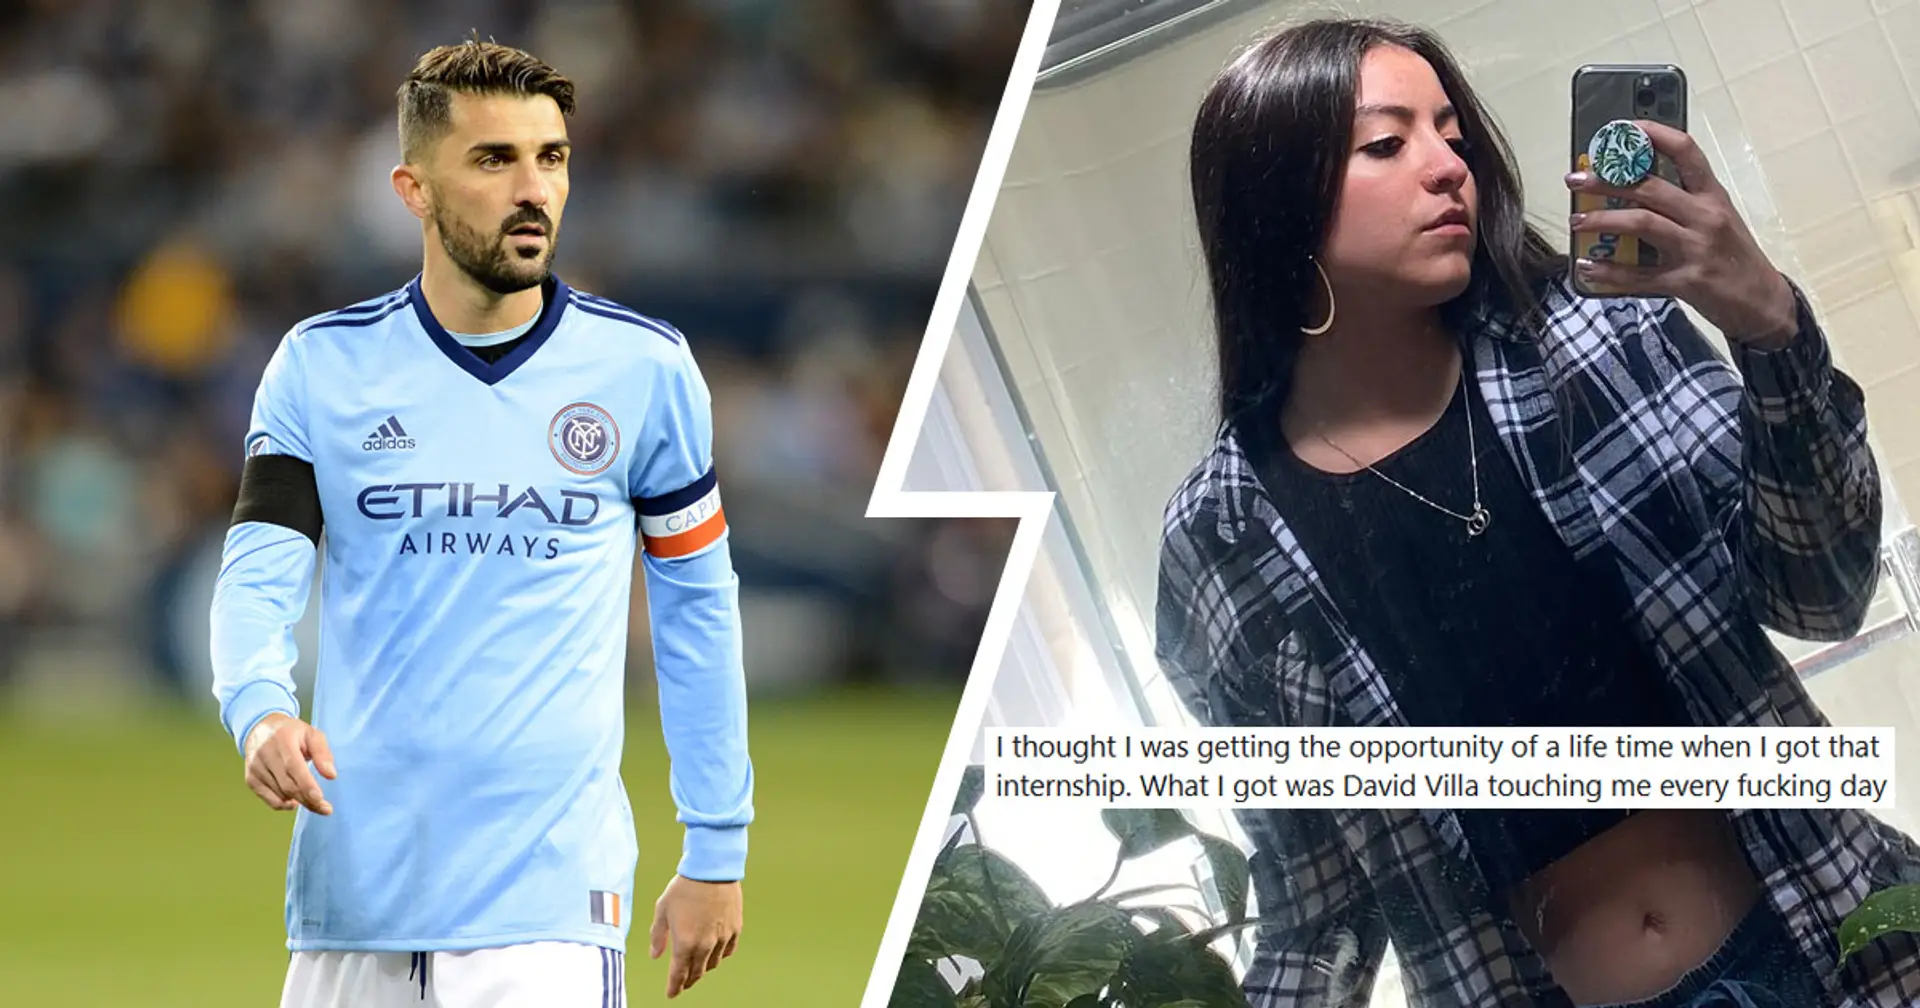 'David Villa was touching me every f***ing day': Former New York City intern accuses ex-Barcelona star of groping and harassment